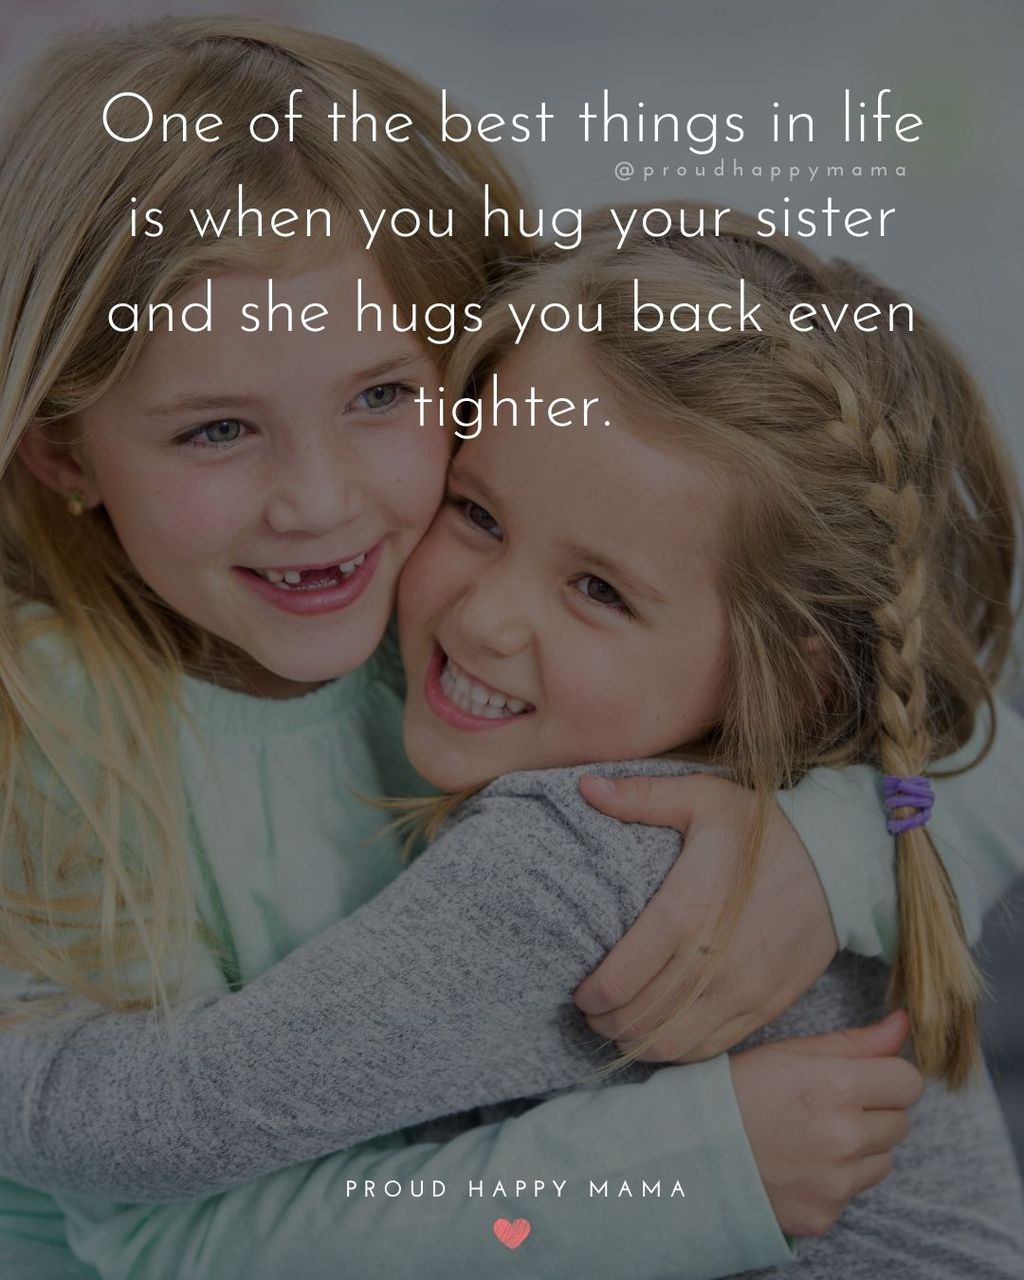 Sister Quotes - One of the best things in life is when you hug your sister and she hugs you back even tighter.